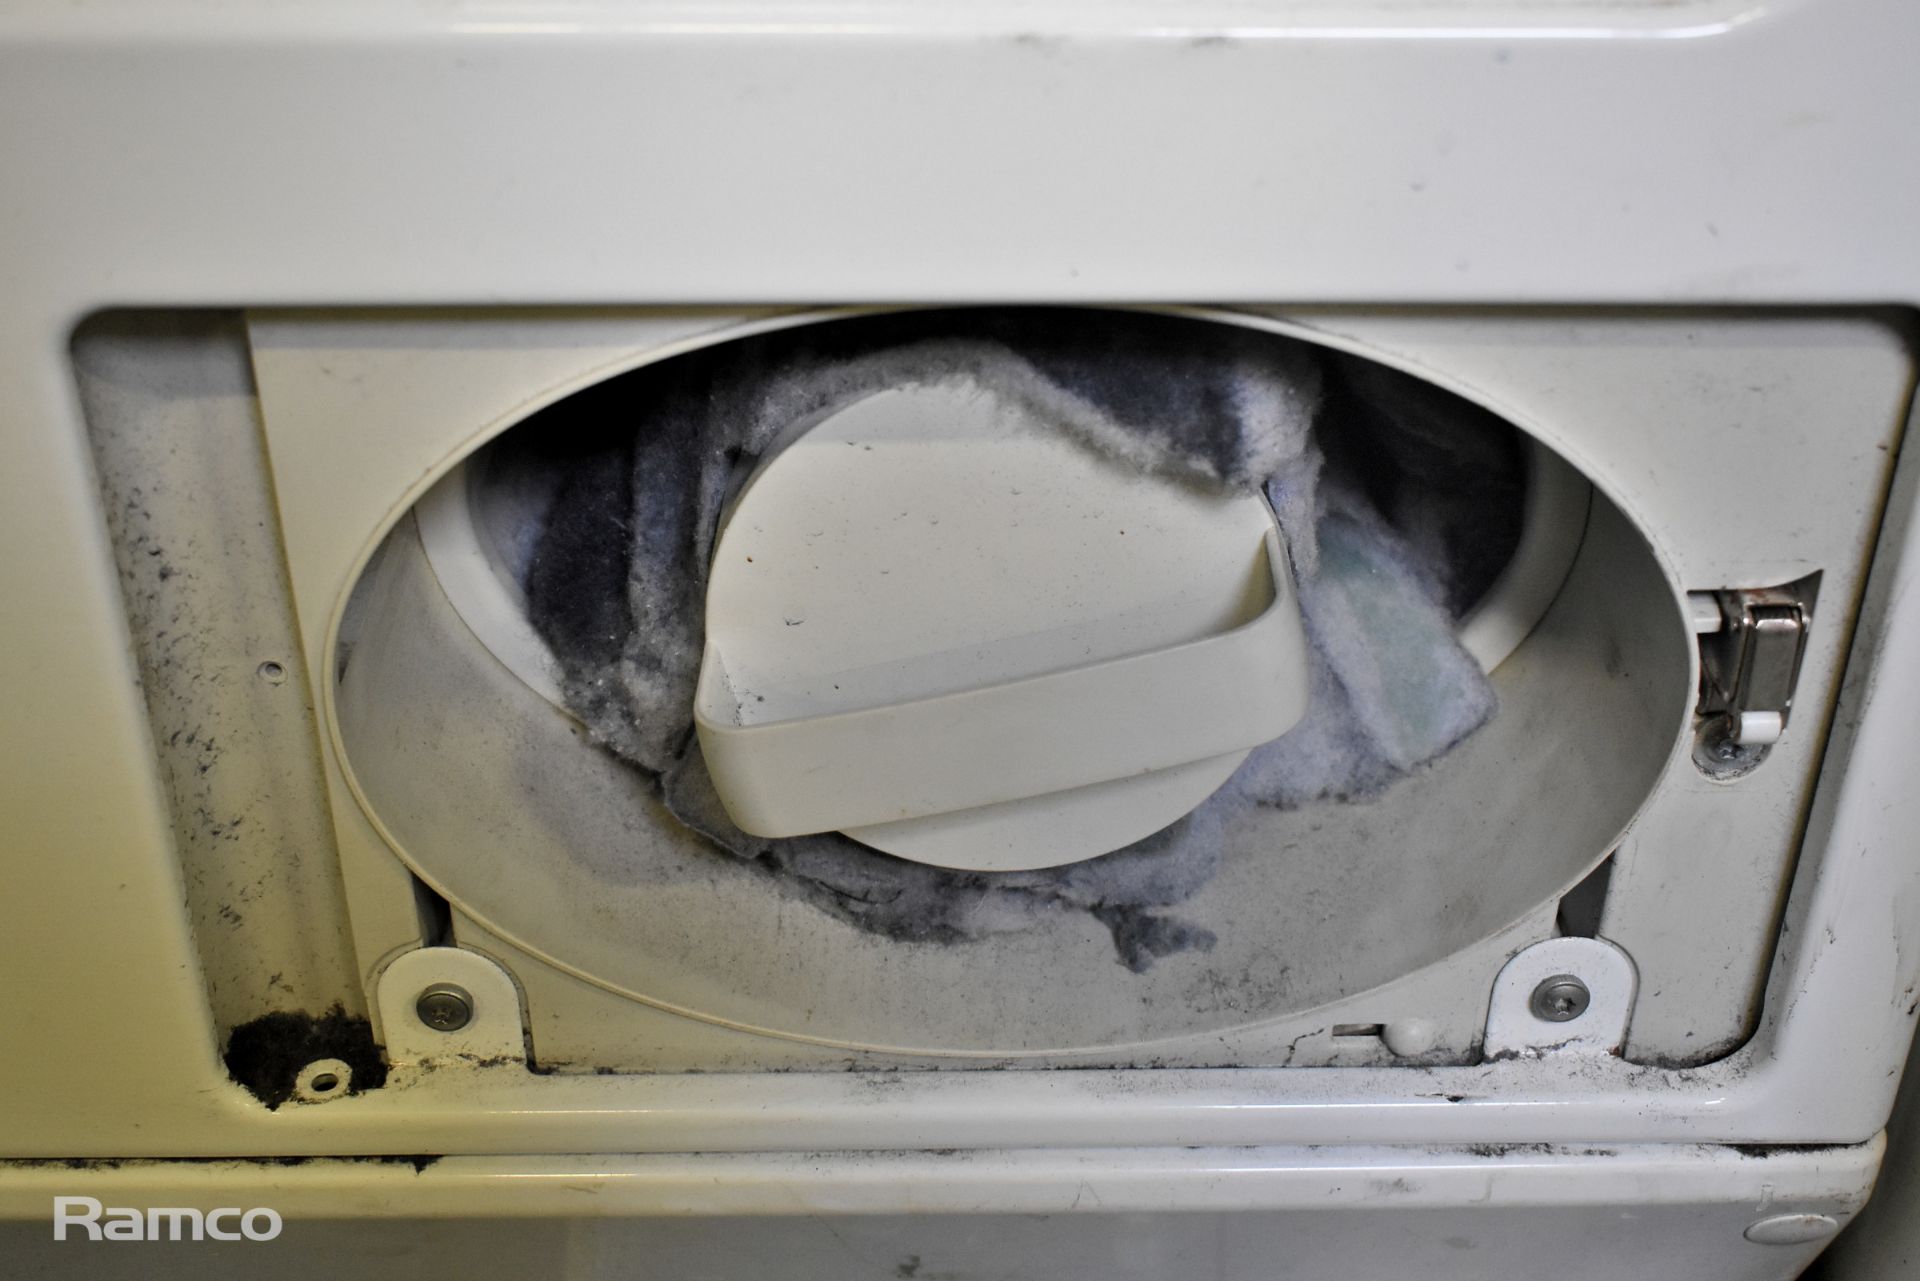 Miele PT 7136 6.5kg vented tumble dryer - W 595 x D 700 x H 850mm - MISSING FILTER COVER - Image 6 of 6